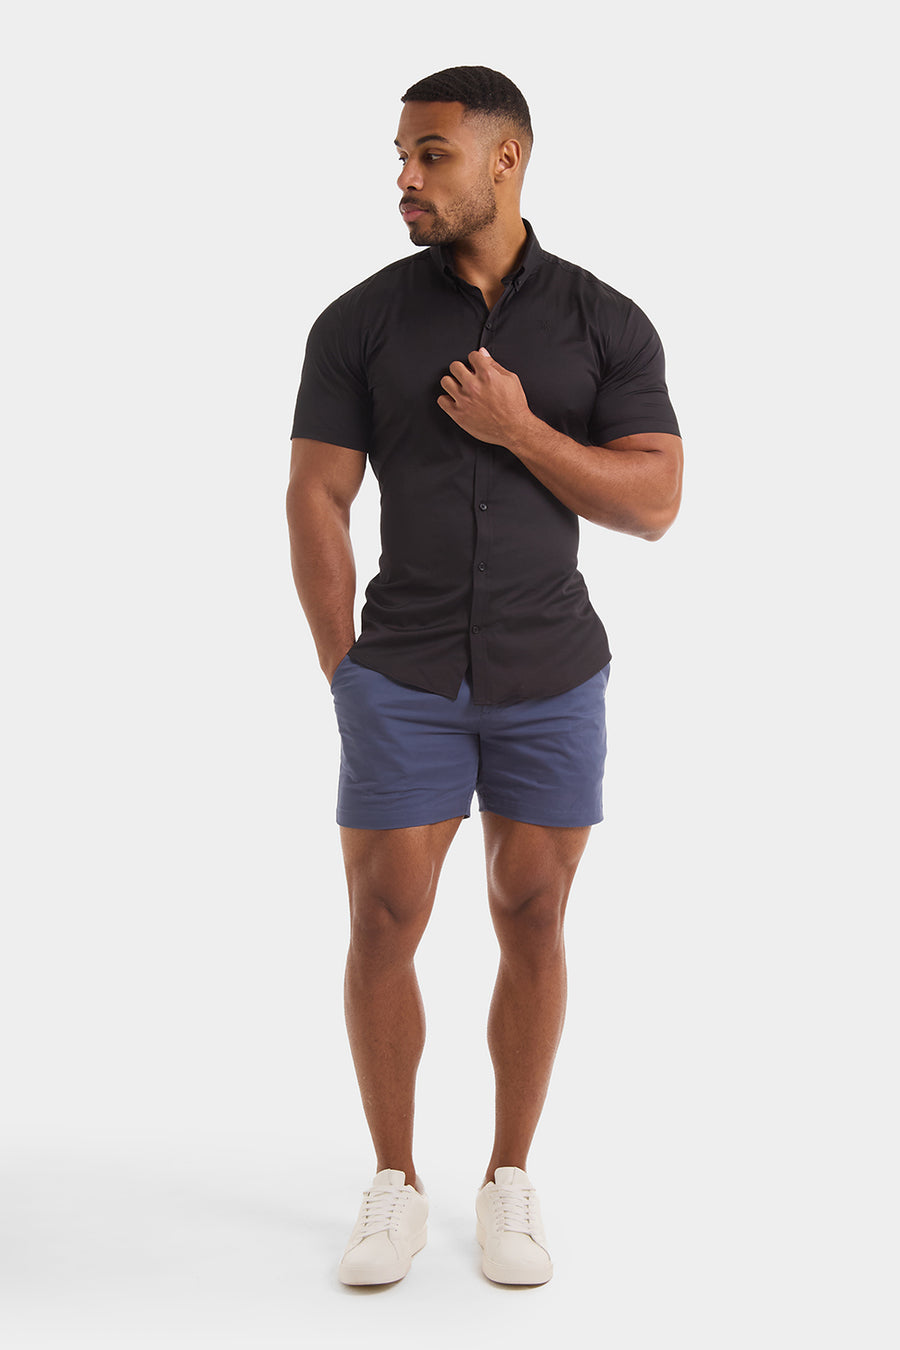 Athletic Fit Chino Shorts 5" in Airforce - TAILORED ATHLETE - USA